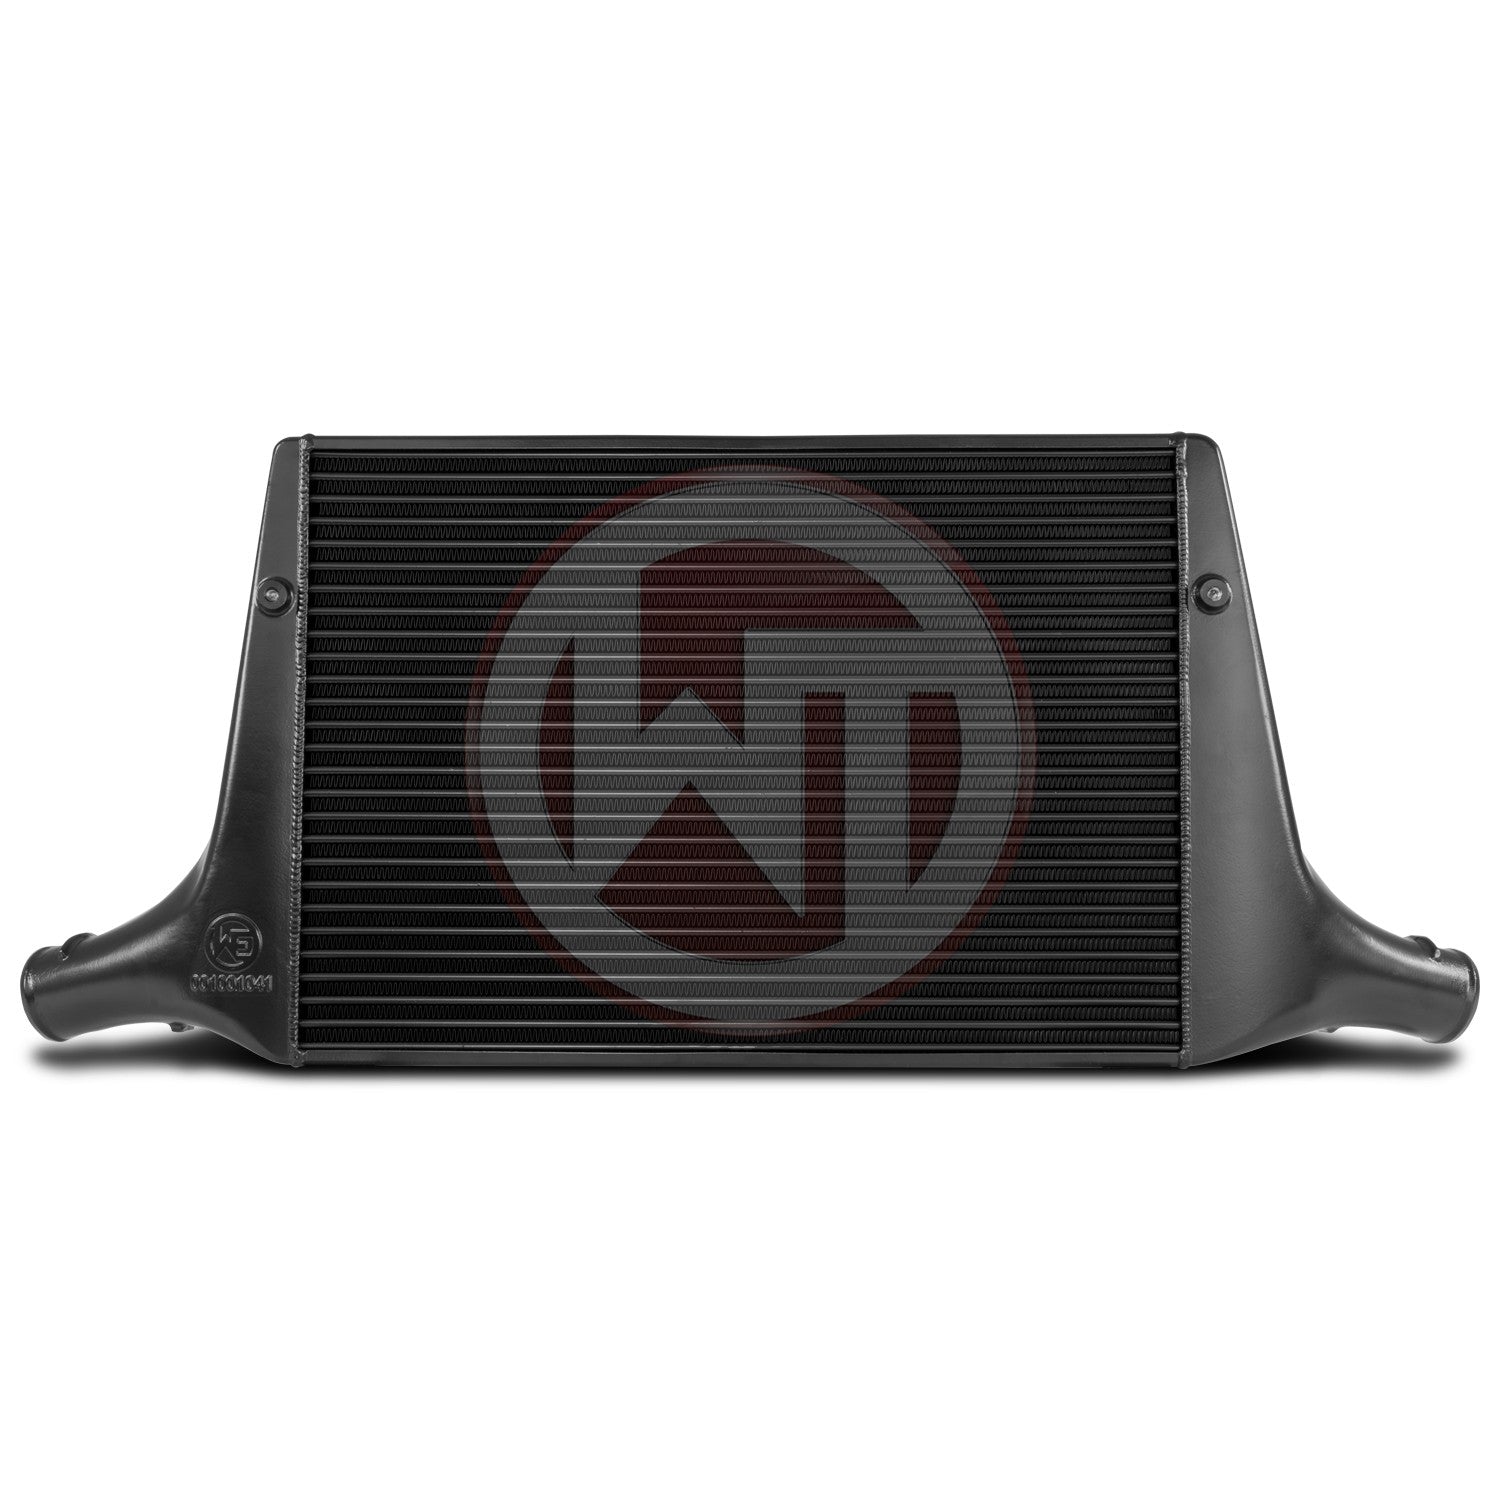 Wagner Tuning Audi A4-A5 B8 2.7 3.0 TDI Competition Intercooler Kit